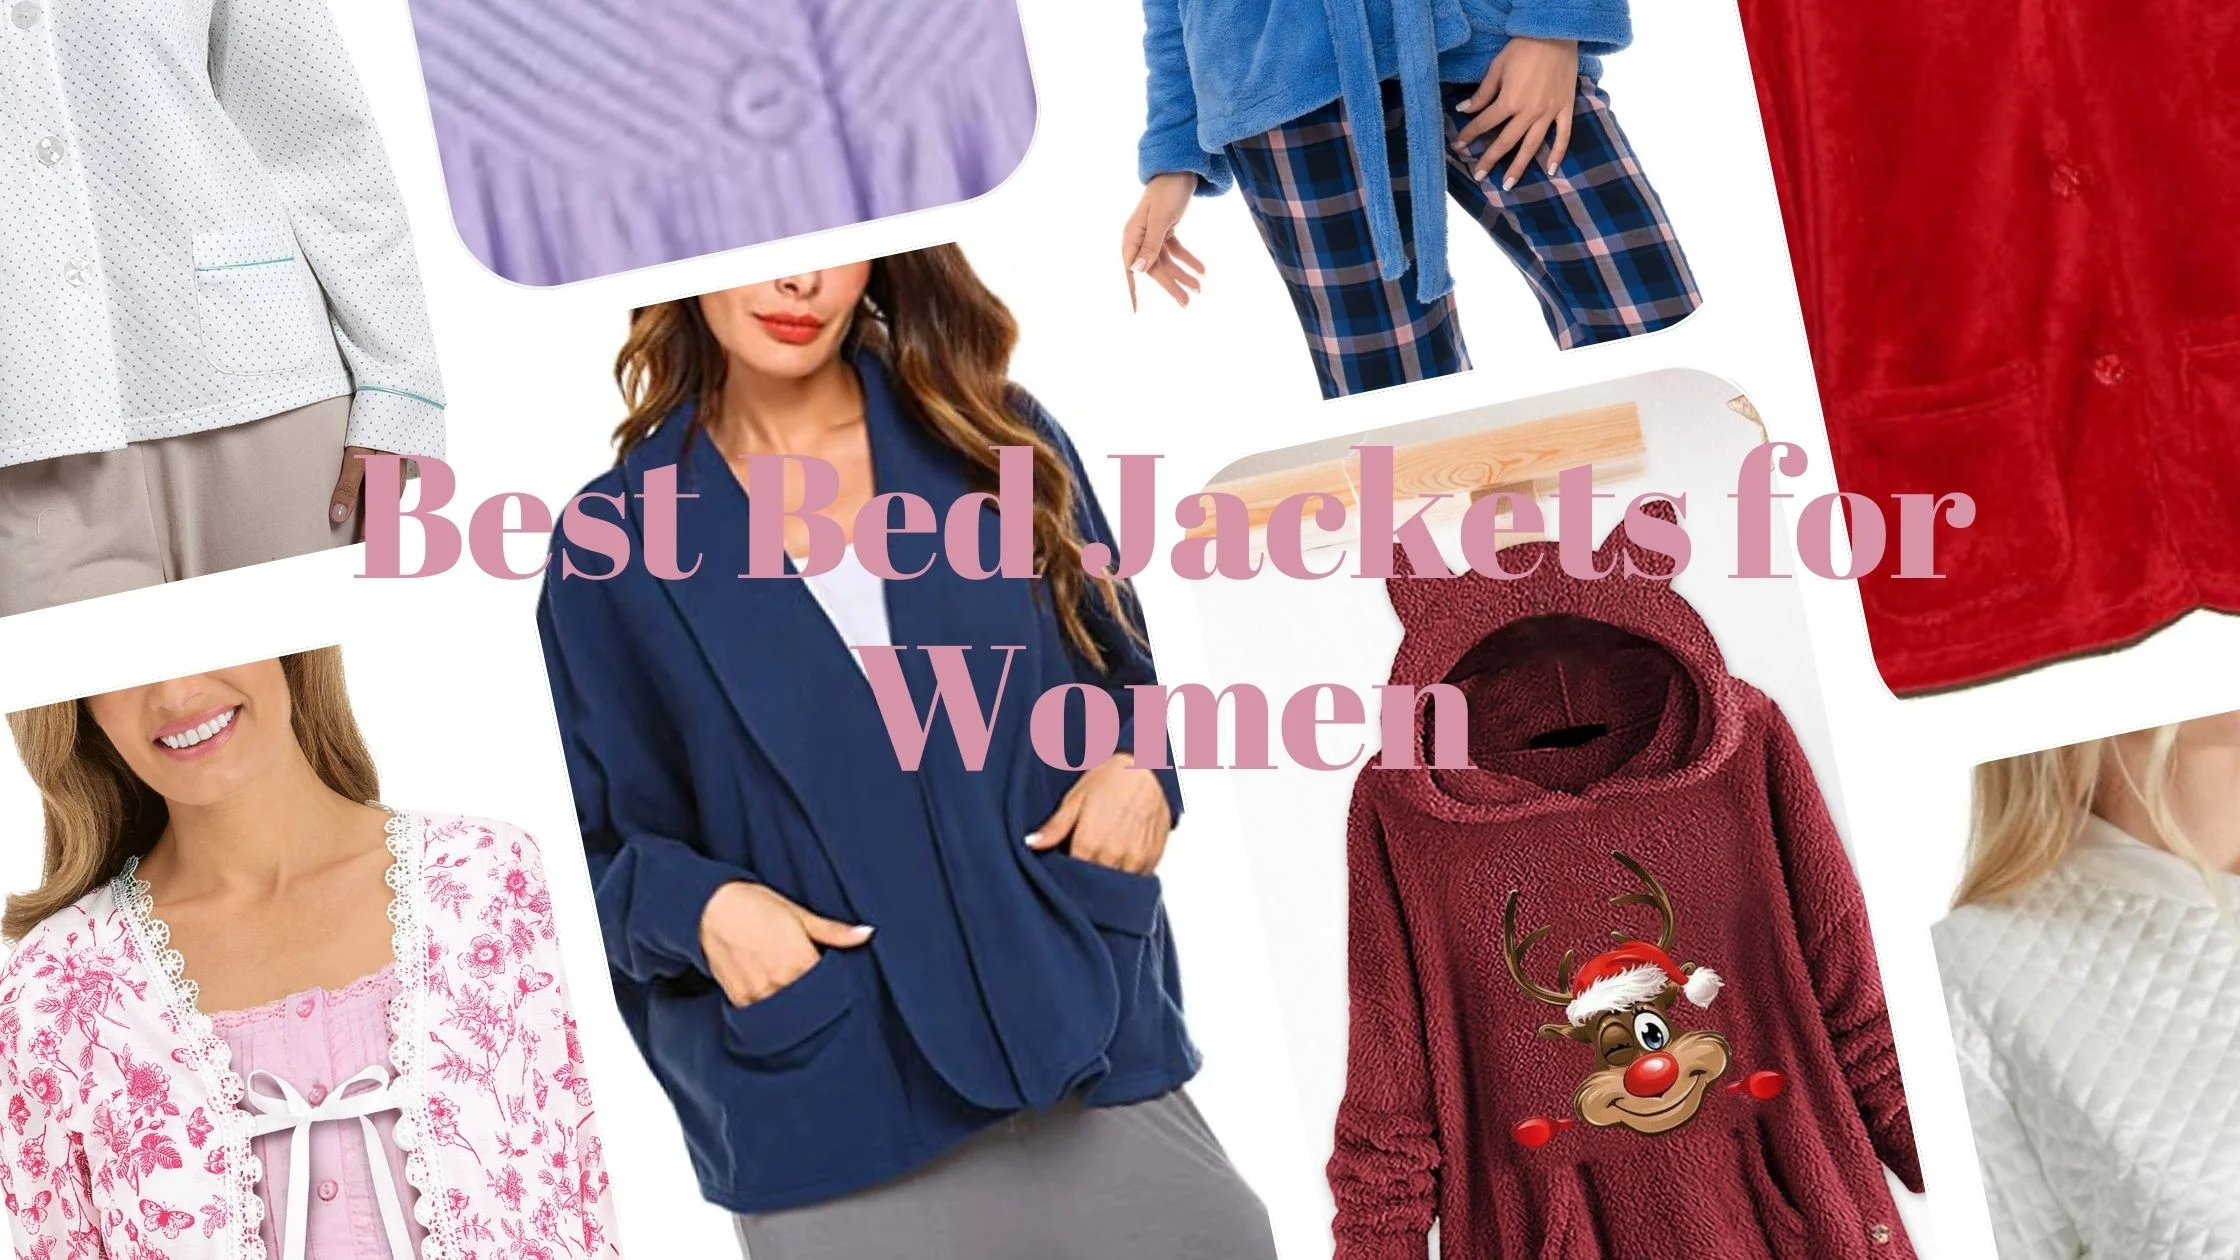 Best Bed Jackets for Women